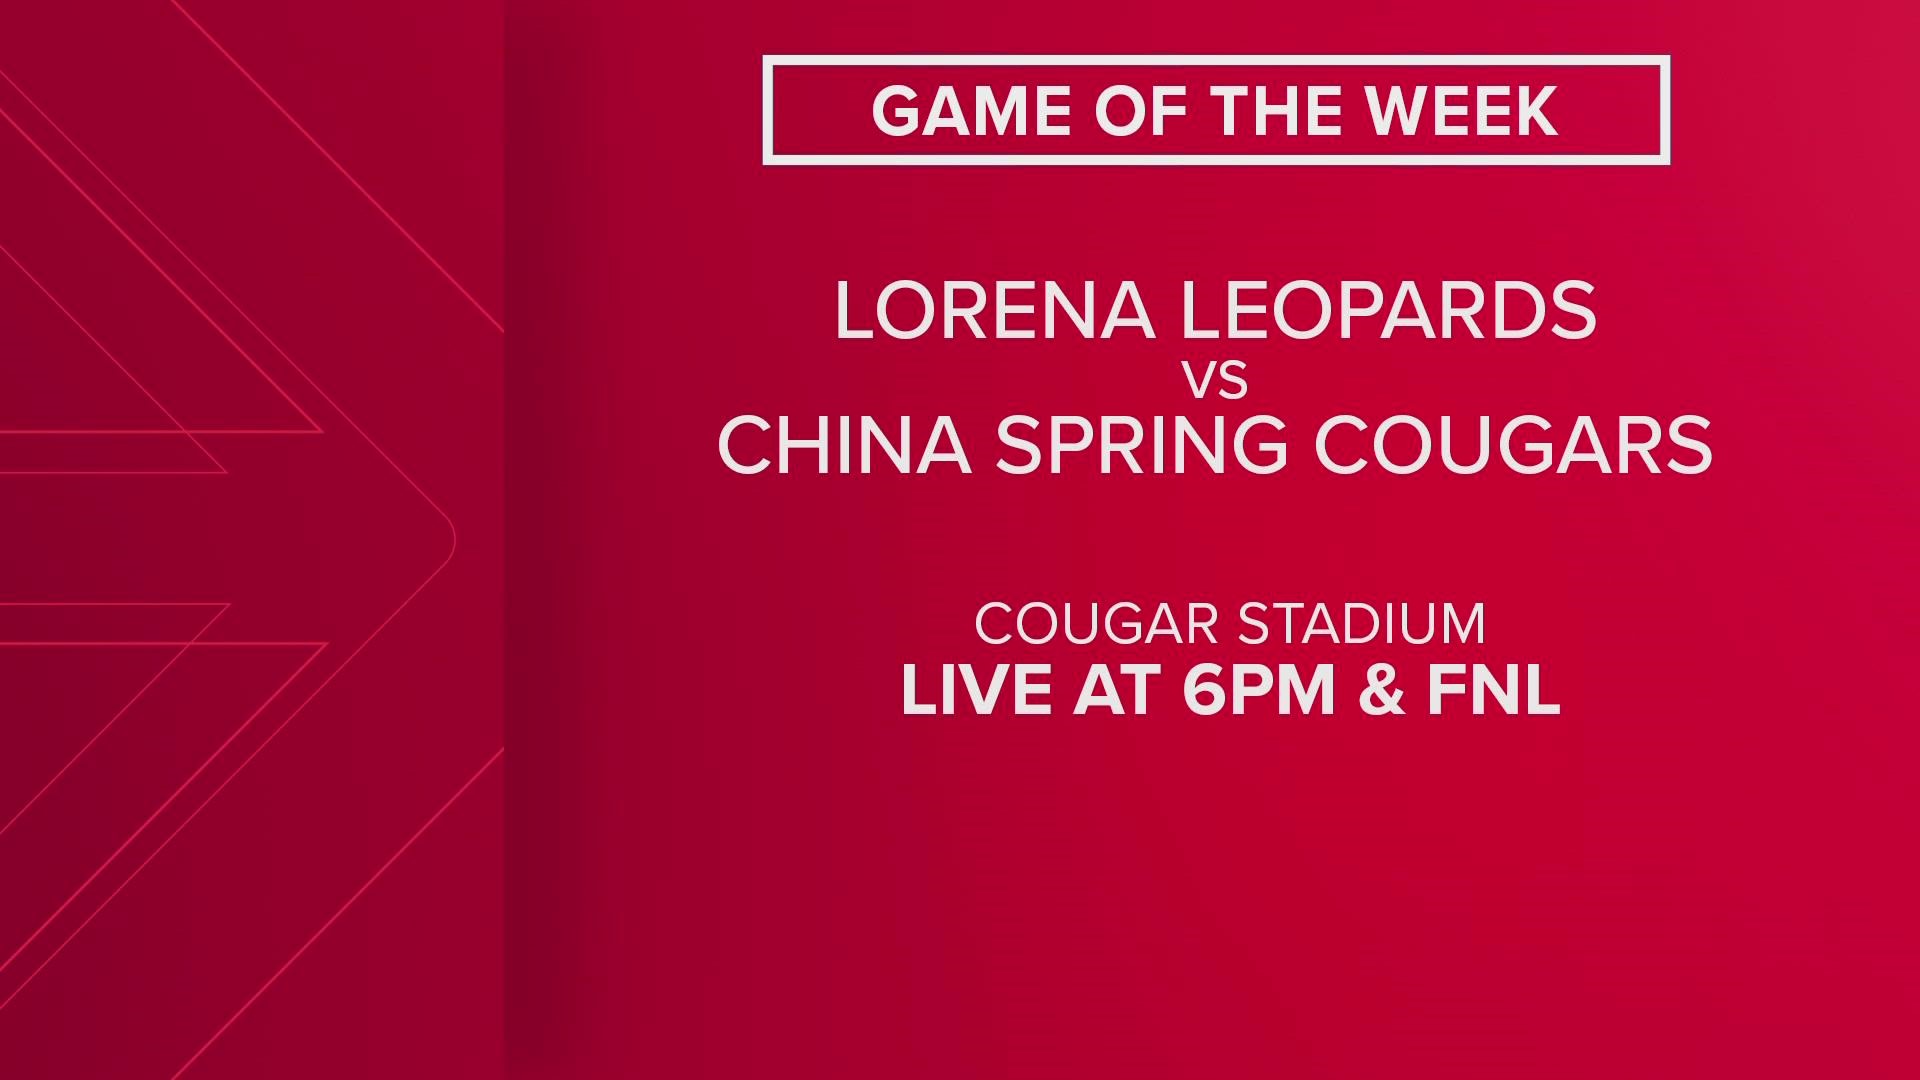 China Spring and Lorena are our two featured opponents in the Game of the Week